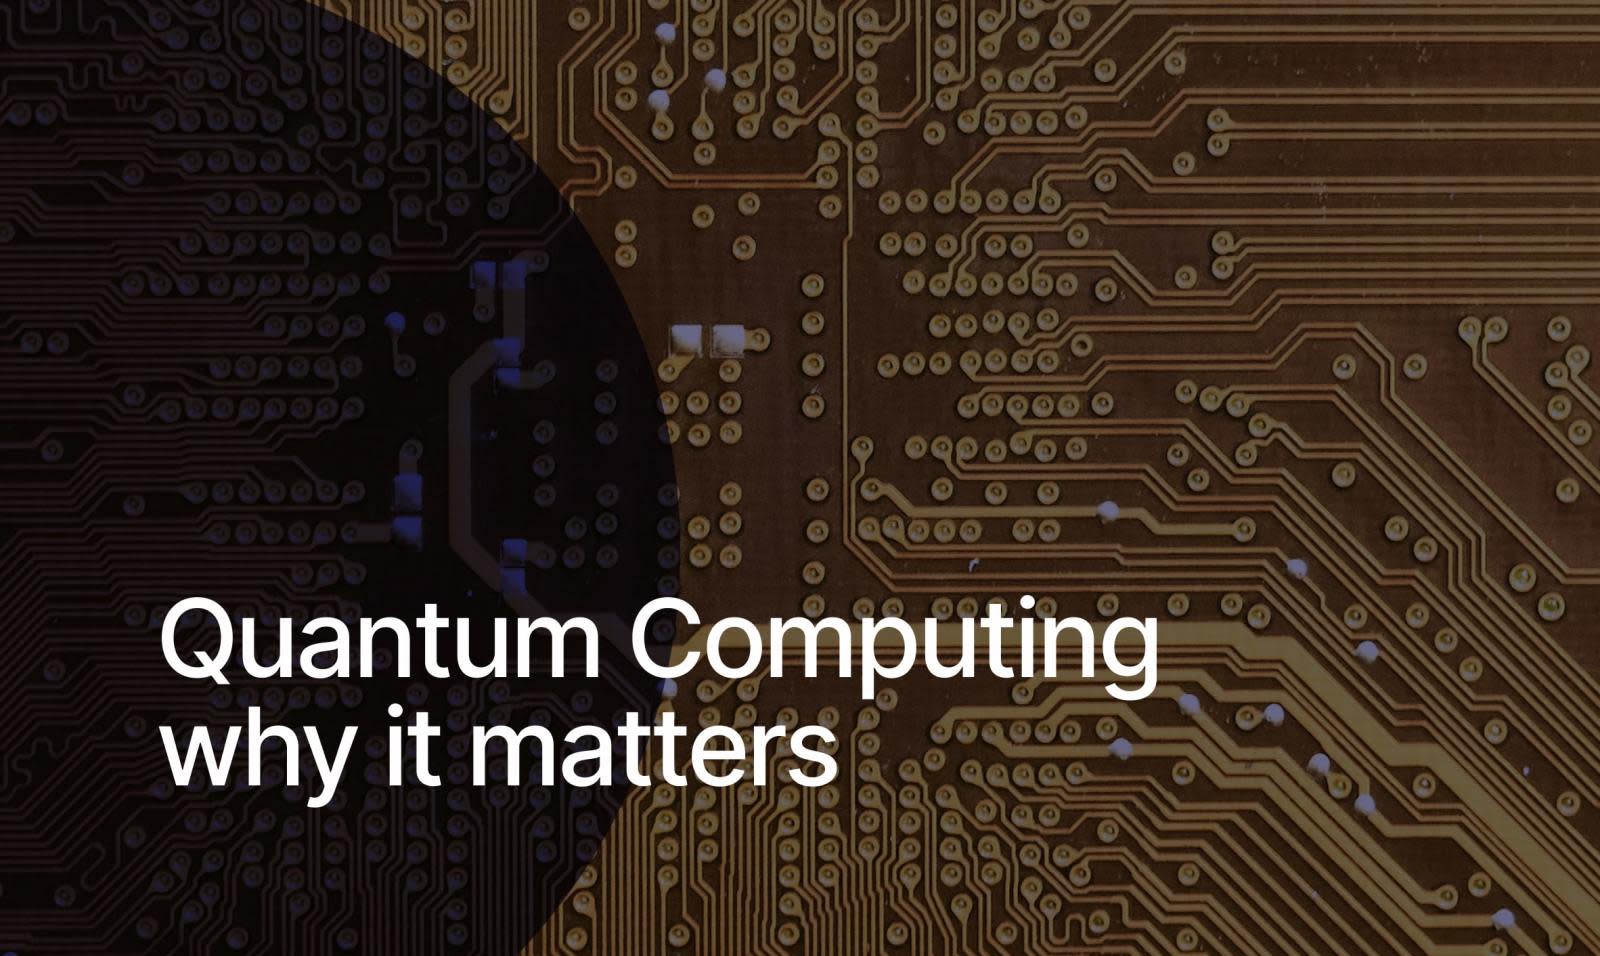 What’s Quantum Computing and why it matters